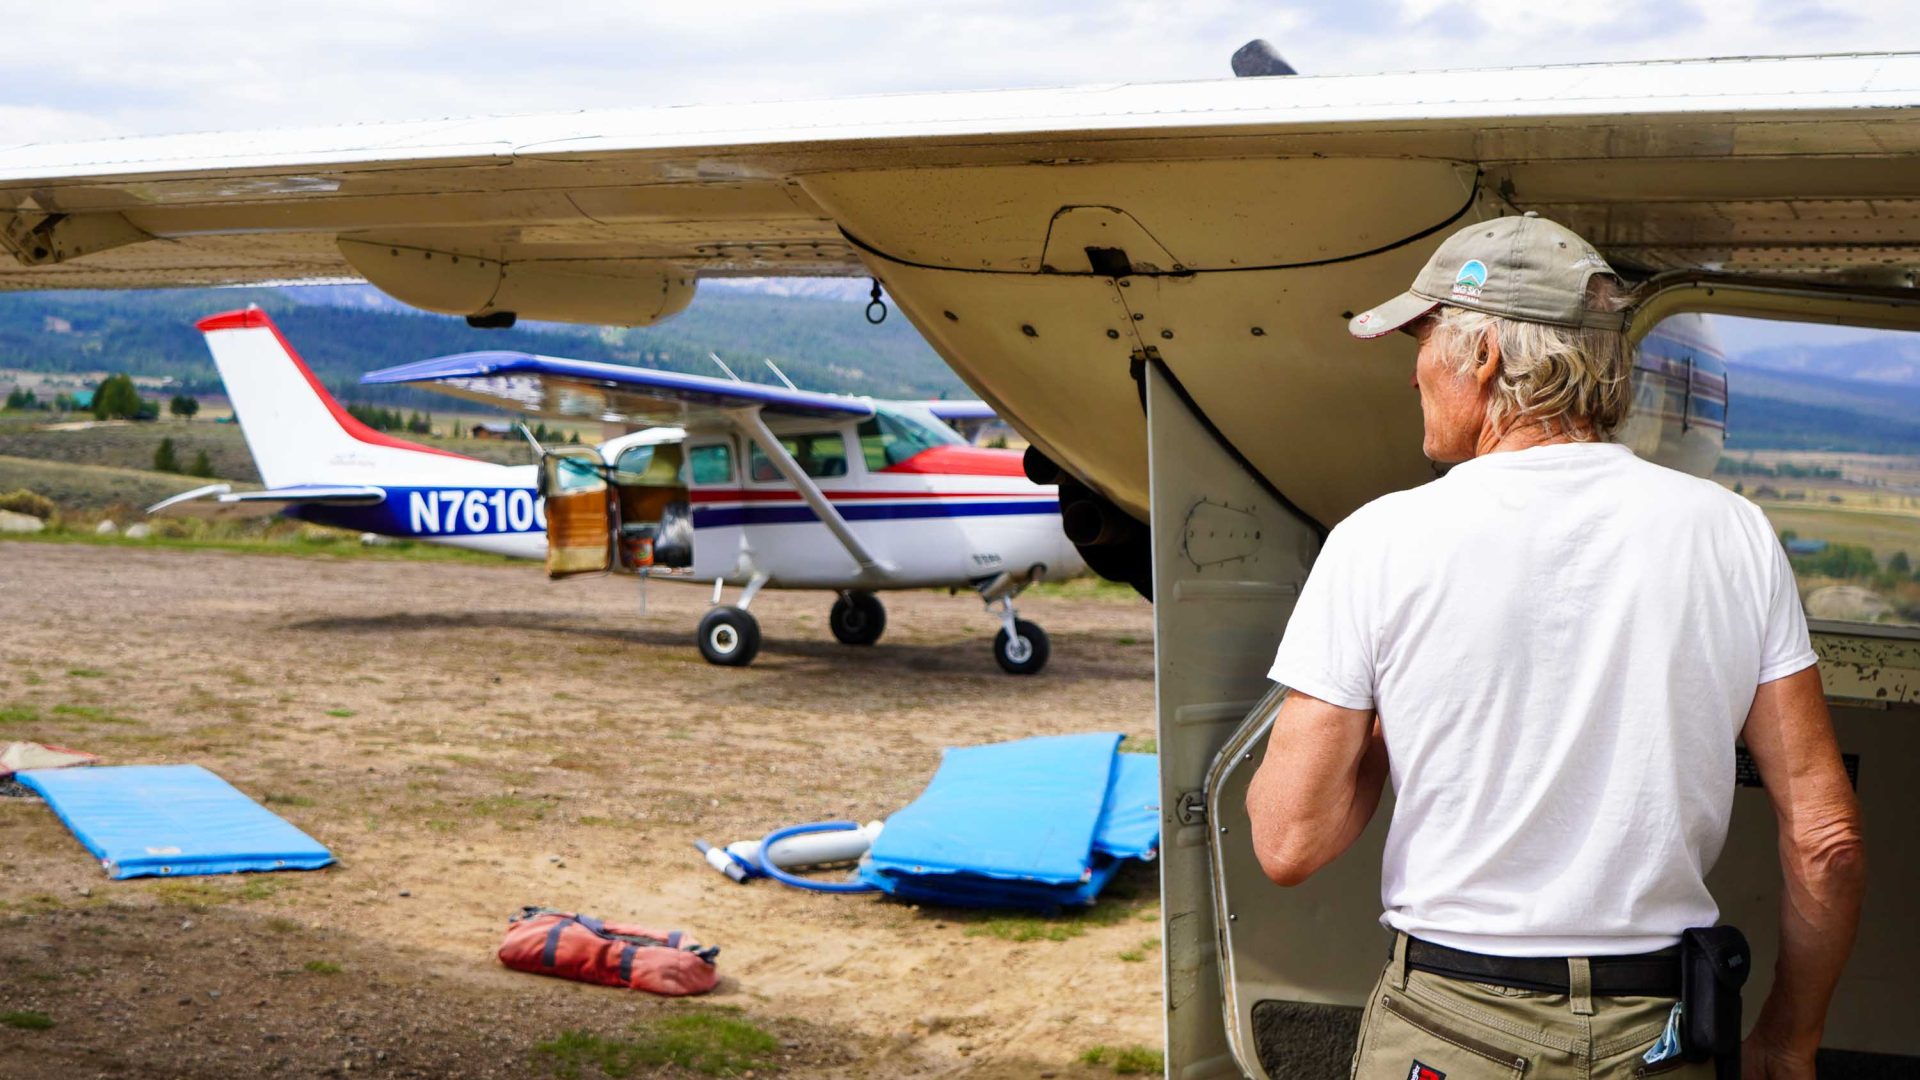 A man seen from behind stands alongside an airplane. There is another airplane in the distance.